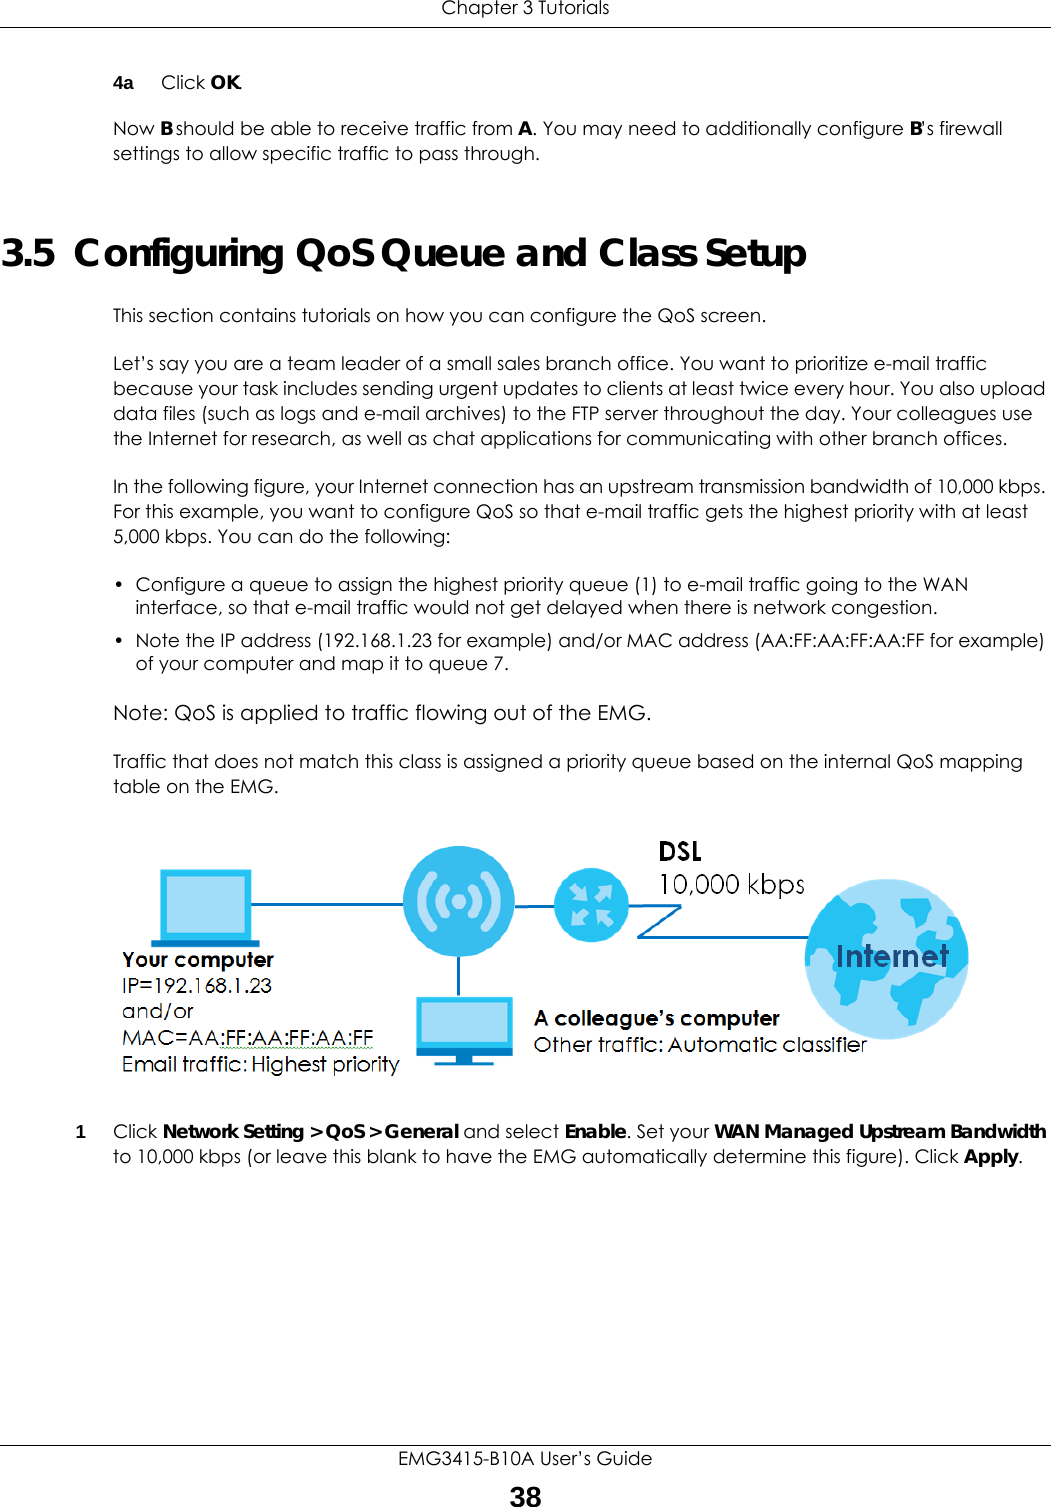 Chapter 3 TutorialsEMG3415-B10A User’s Guide384a Click OK.Now B should be able to receive traffic from A. You may need to additionally configure B’s firewall settings to allow specific traffic to pass through.3.5  Configuring QoS Queue and Class SetupThis section contains tutorials on how you can configure the QoS screen.Let’s say you are a team leader of a small sales branch office. You want to prioritize e-mail traffic because your task includes sending urgent updates to clients at least twice every hour. You also upload data files (such as logs and e-mail archives) to the FTP server throughout the day. Your colleagues use the Internet for research, as well as chat applications for communicating with other branch offices.In the following figure, your Internet connection has an upstream transmission bandwidth of 10,000 kbps. For this example, you want to configure QoS so that e-mail traffic gets the highest priority with at least 5,000 kbps. You can do the following: • Configure a queue to assign the highest priority queue (1) to e-mail traffic going to the WAN interface, so that e-mail traffic would not get delayed when there is network congestion. • Note the IP address (192.168.1.23 for example) and/or MAC address (AA:FF:AA:FF:AA:FF for example) of your computer and map it to queue 7. Note: QoS is applied to traffic flowing out of the EMG.Traffic that does not match this class is assigned a priority queue based on the internal QoS mapping table on the EMG.QoS Example1Click Network Setting &gt; QoS &gt; General and select Enable. Set your WAN Managed Upstream Bandwidth to 10,000 kbps (or leave this blank to have the EMG automatically determine this figure). Click Apply.